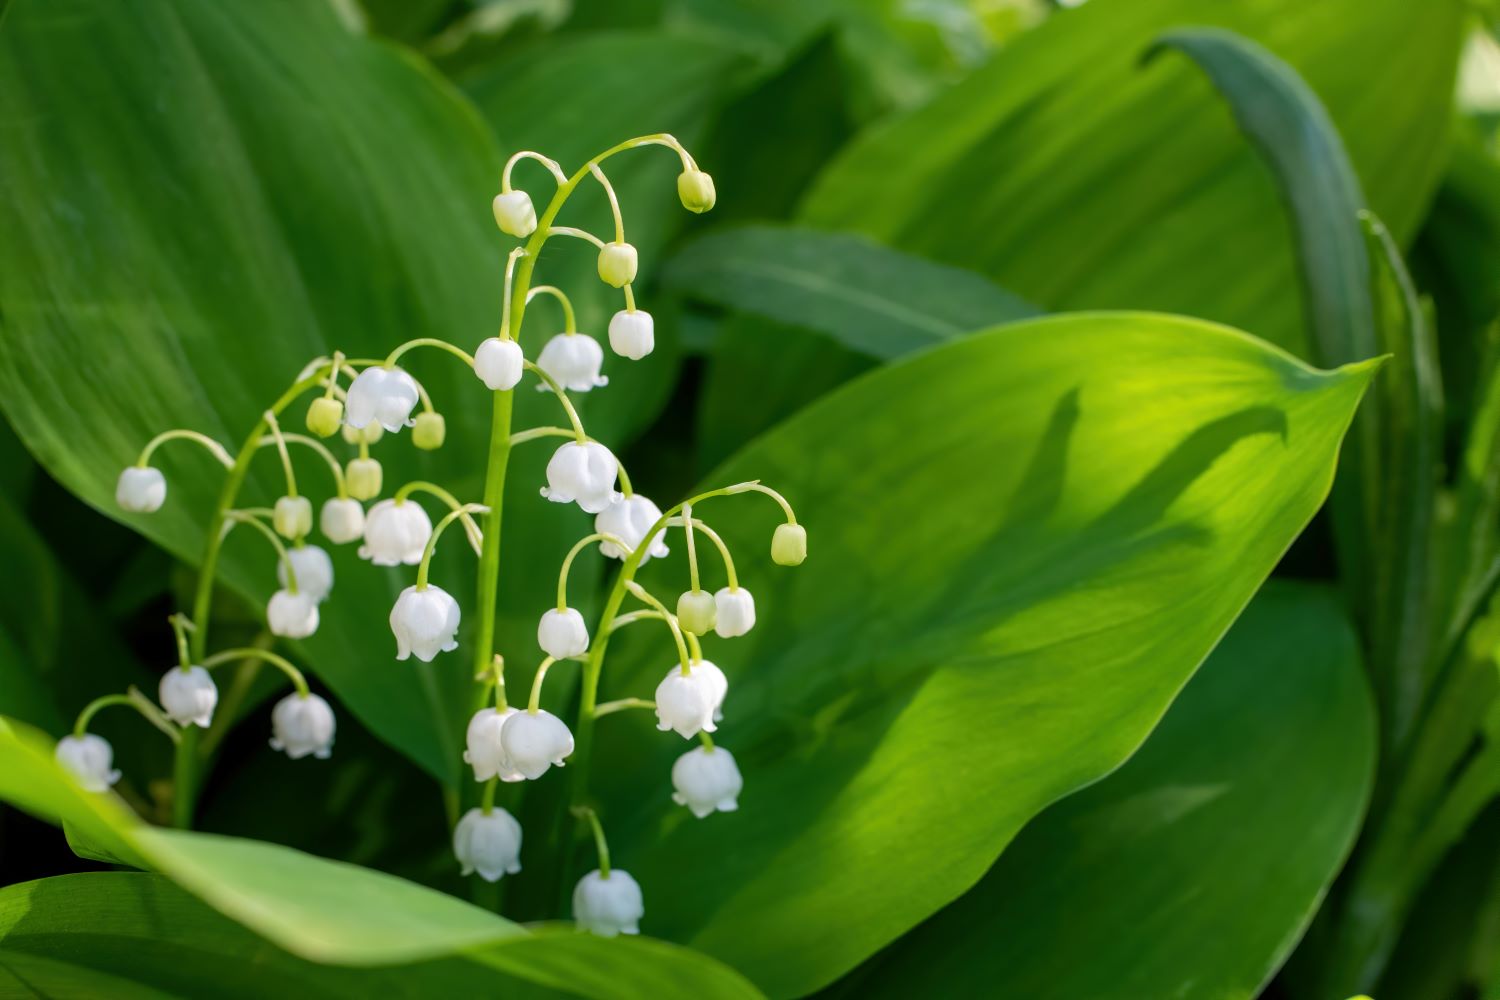 do dogs eat lily of the valley